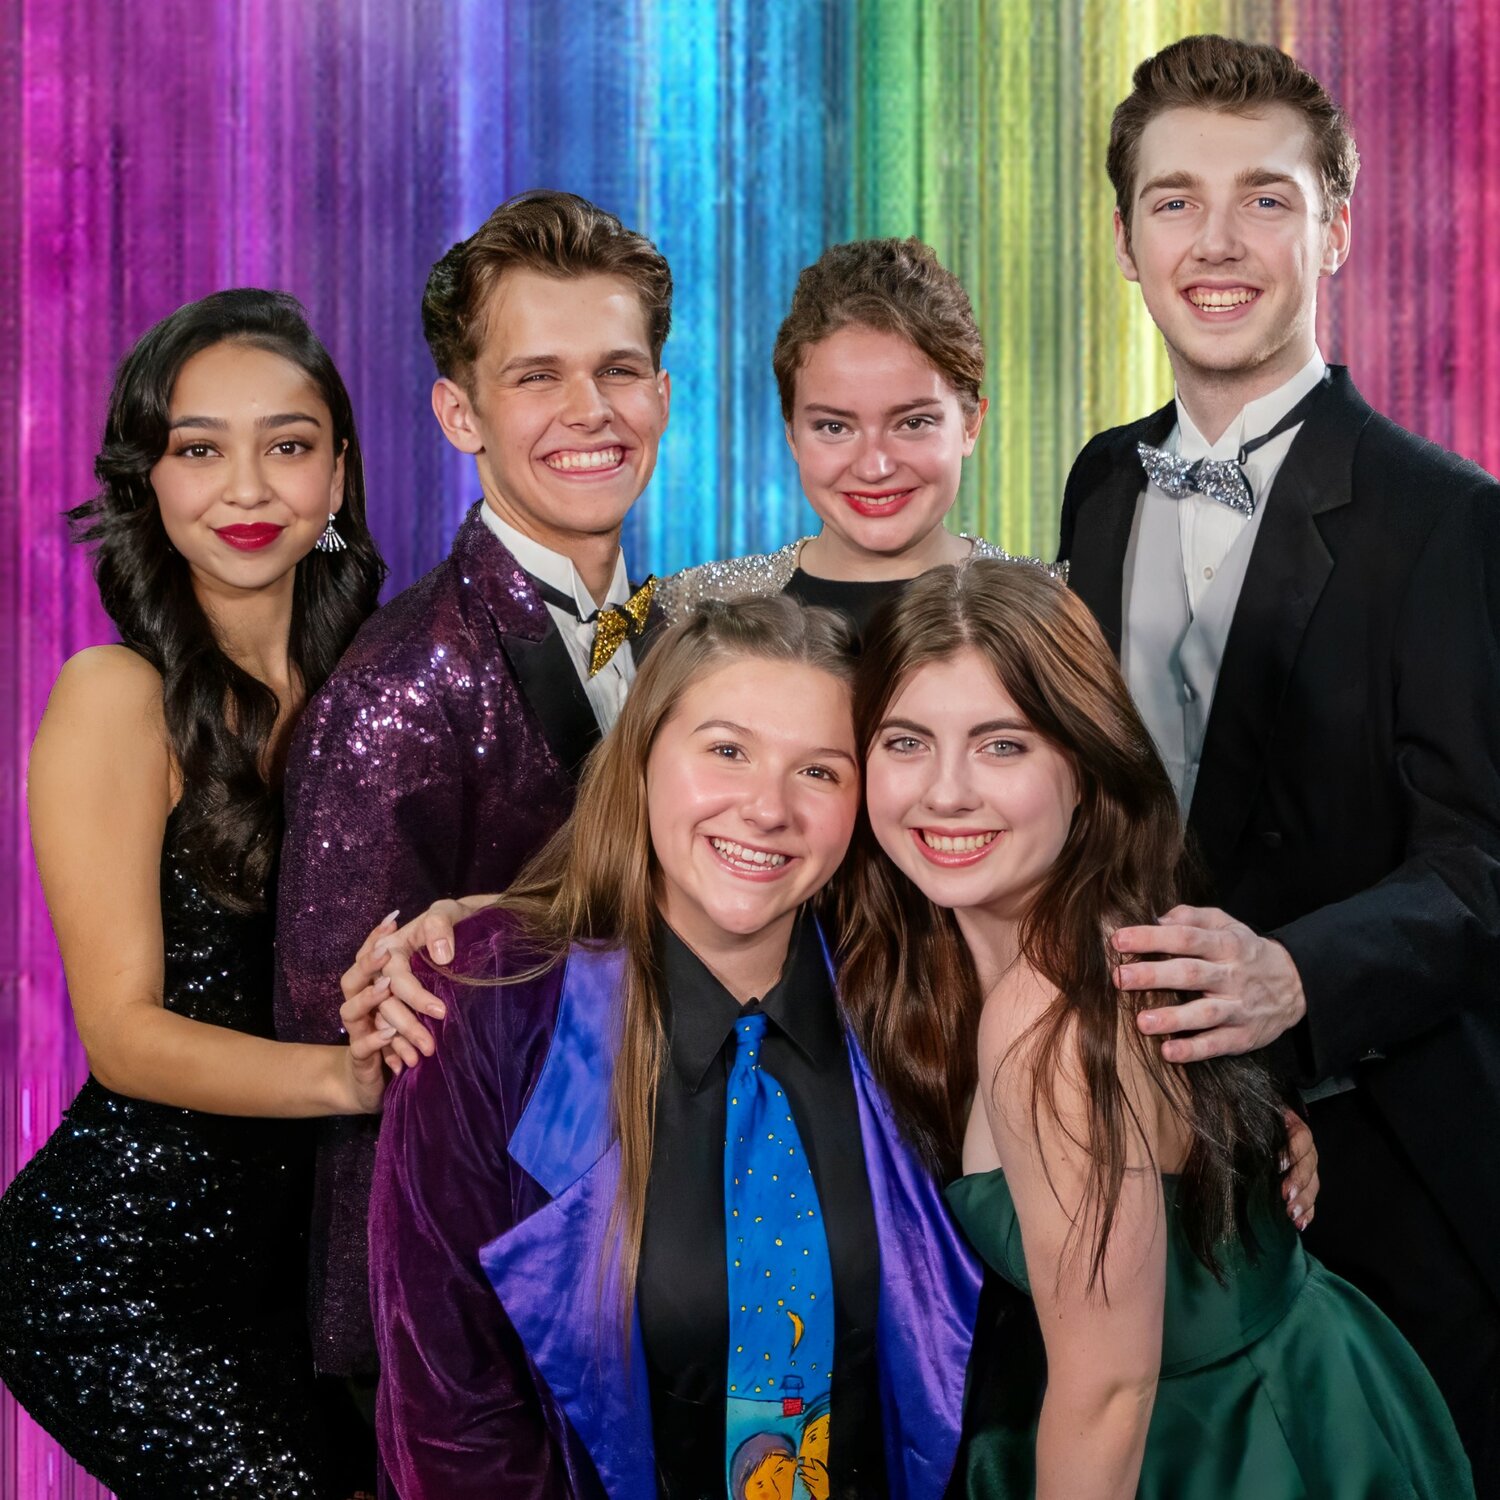 Pictured in back are Olivia Feldman as Angie Dickenson, Charlie Hall as Barry Glickman, Nora Palermo as Dee Dee Allen and Declan Skaggs as Trent Oliver; in front are Hailey Laidigas as Emma Nolan and Sydney Hassler as Alyssa Greene.